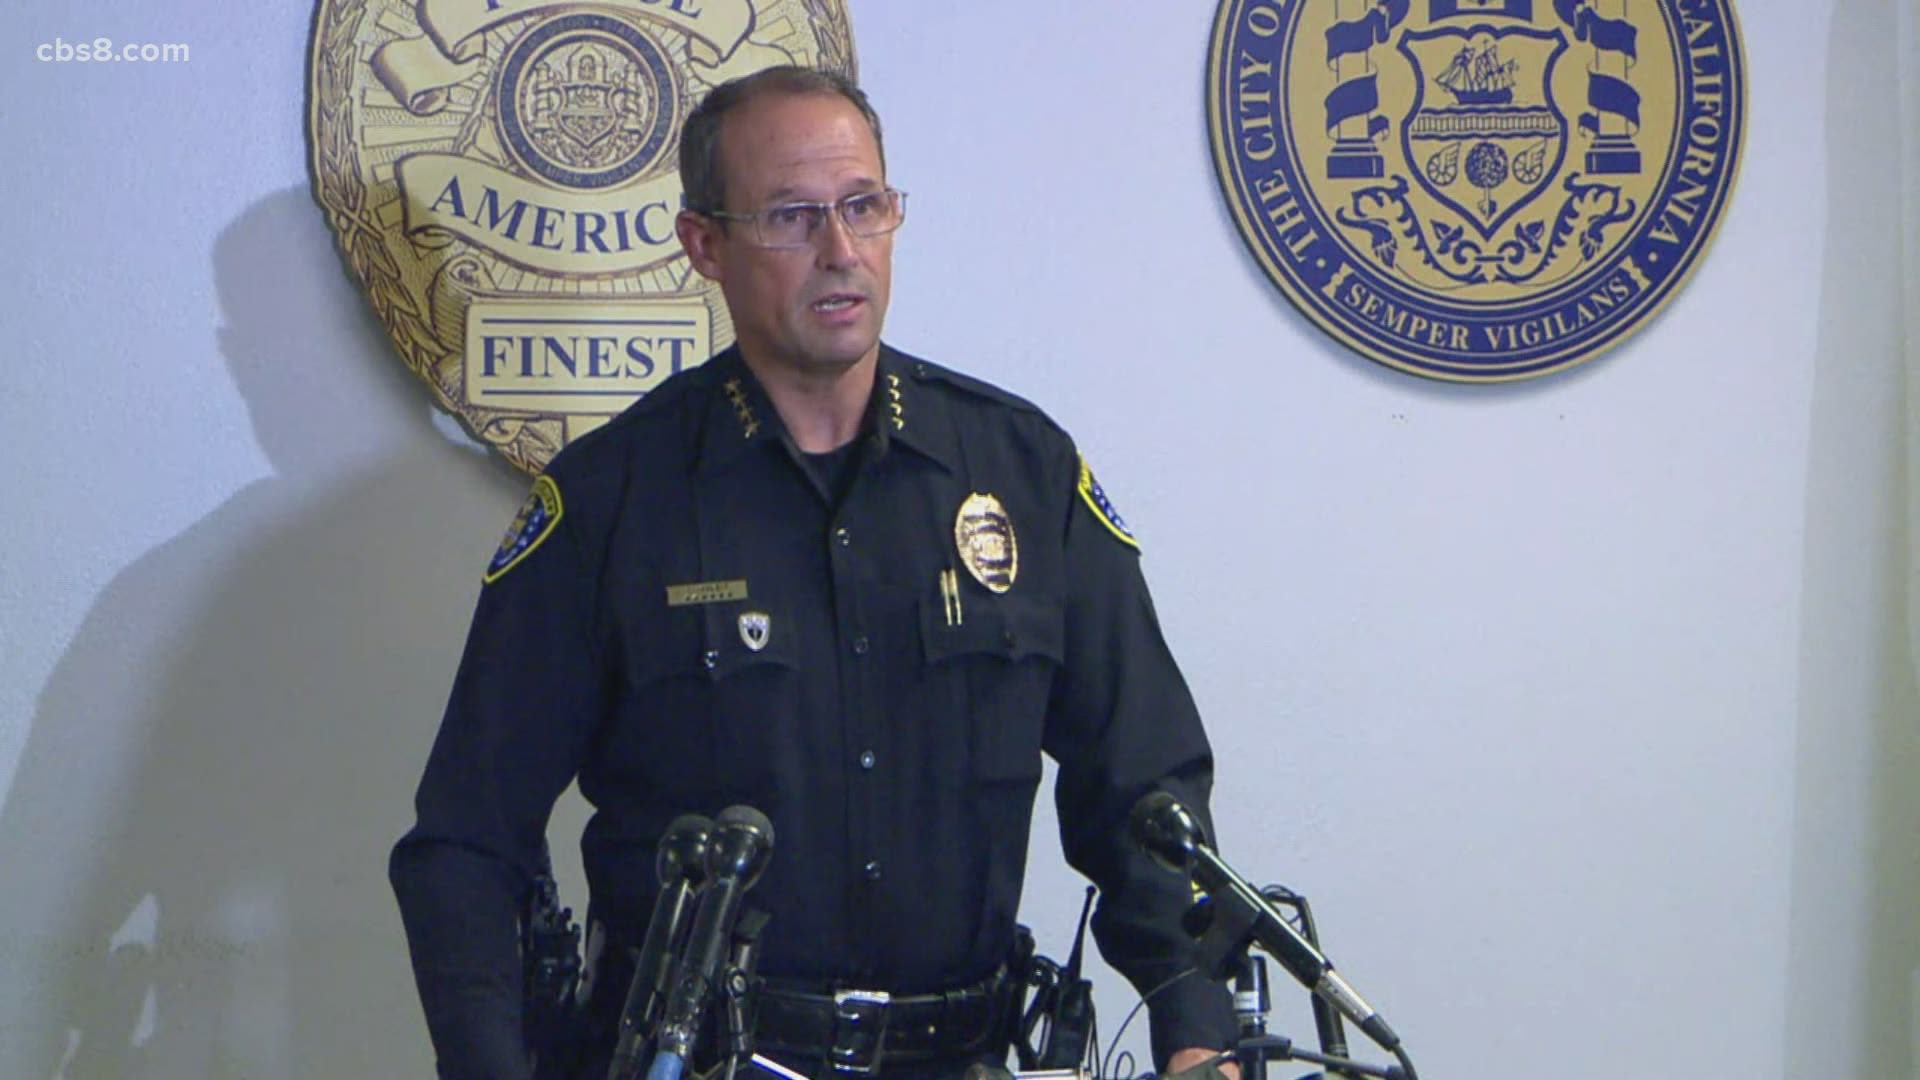 During an afternoon news conference, the SDPD identified the suspect as 32-year-old, Travis Sarreshteh.